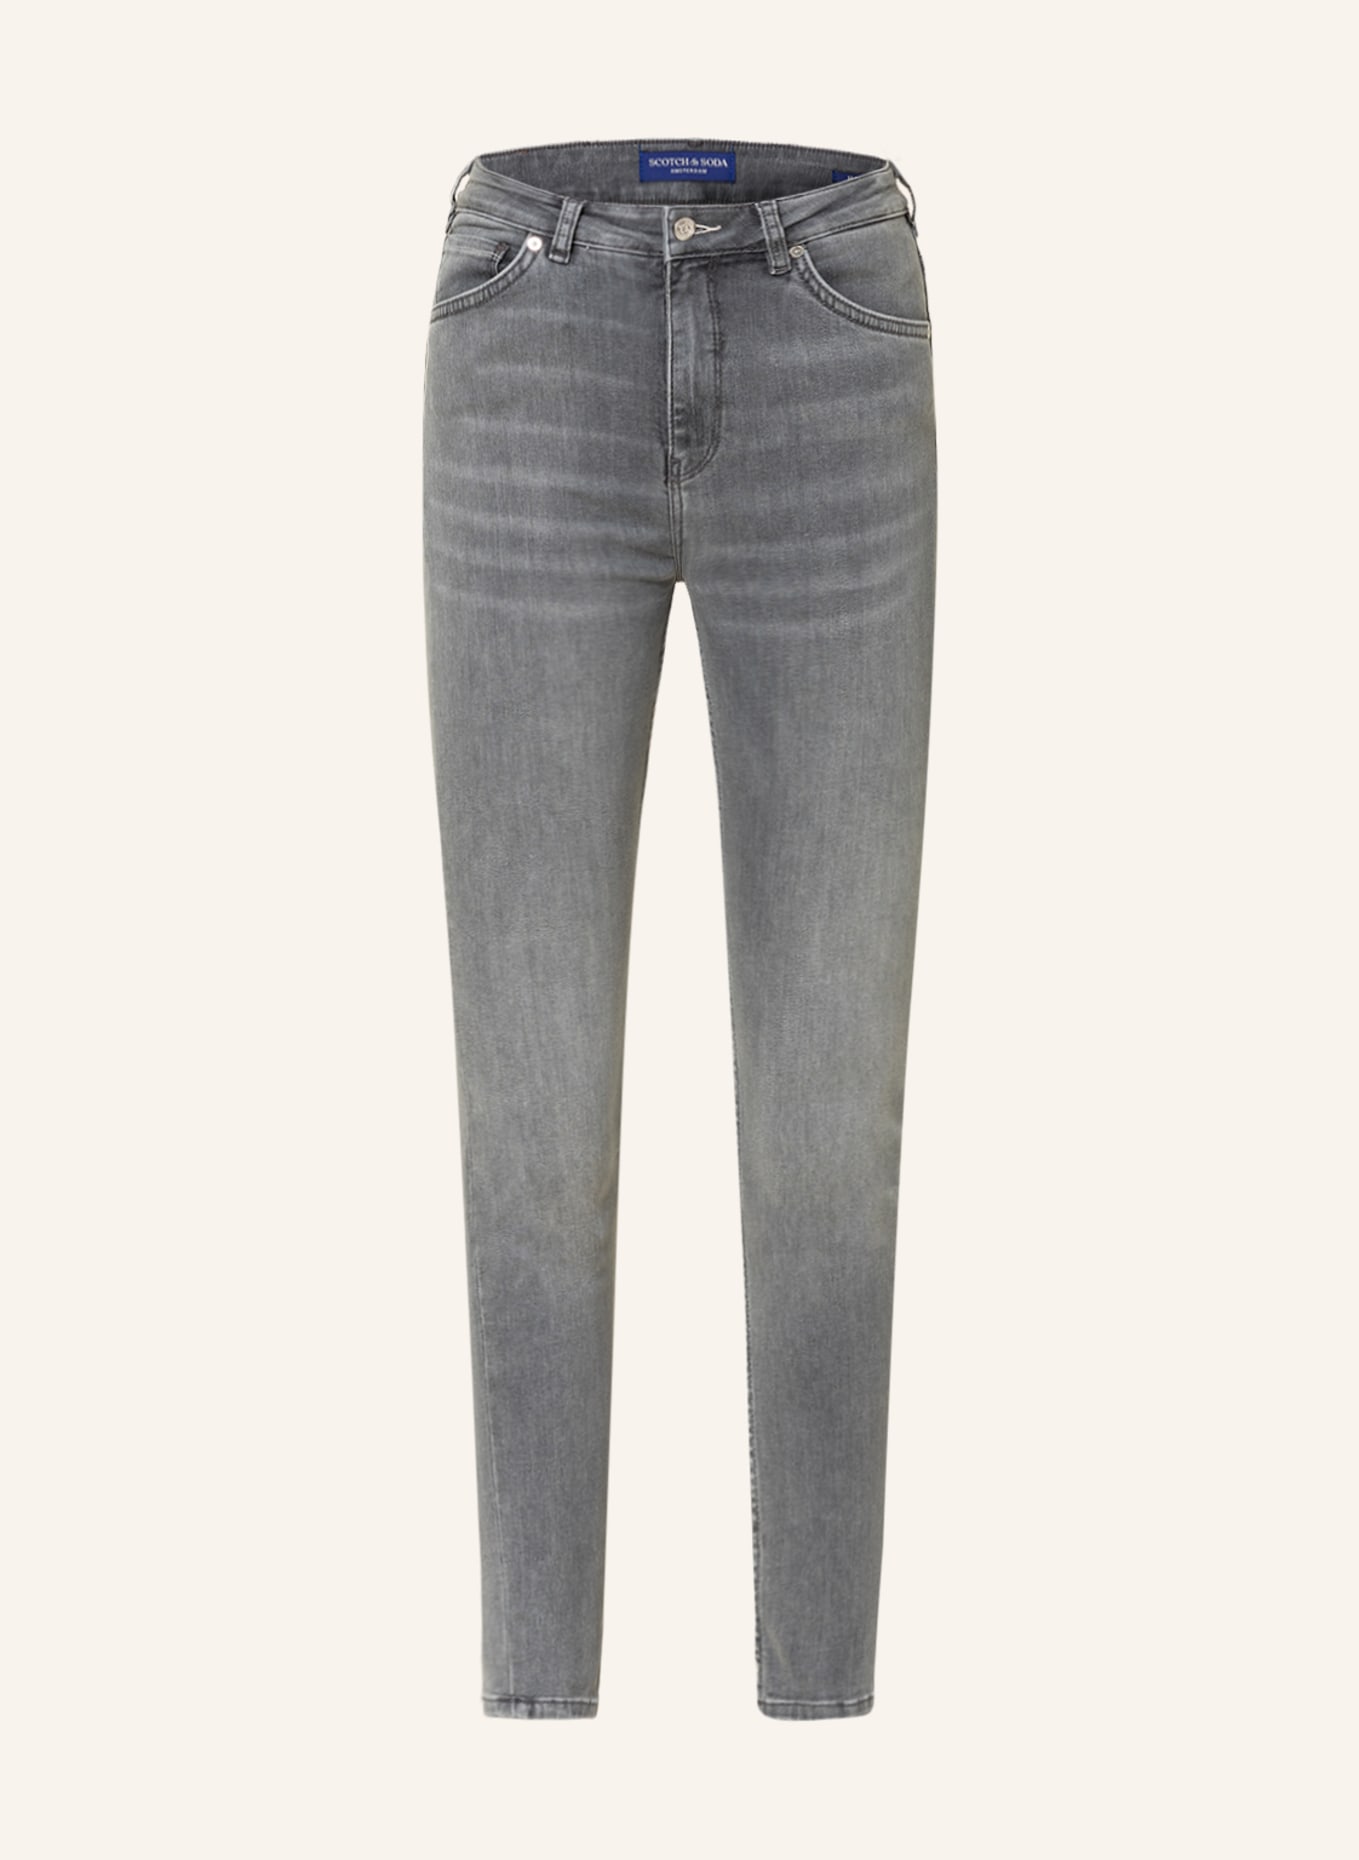 SCOTCH & SODA Skinny jeans, Color: 3974 Back To My Roots (Image 1)